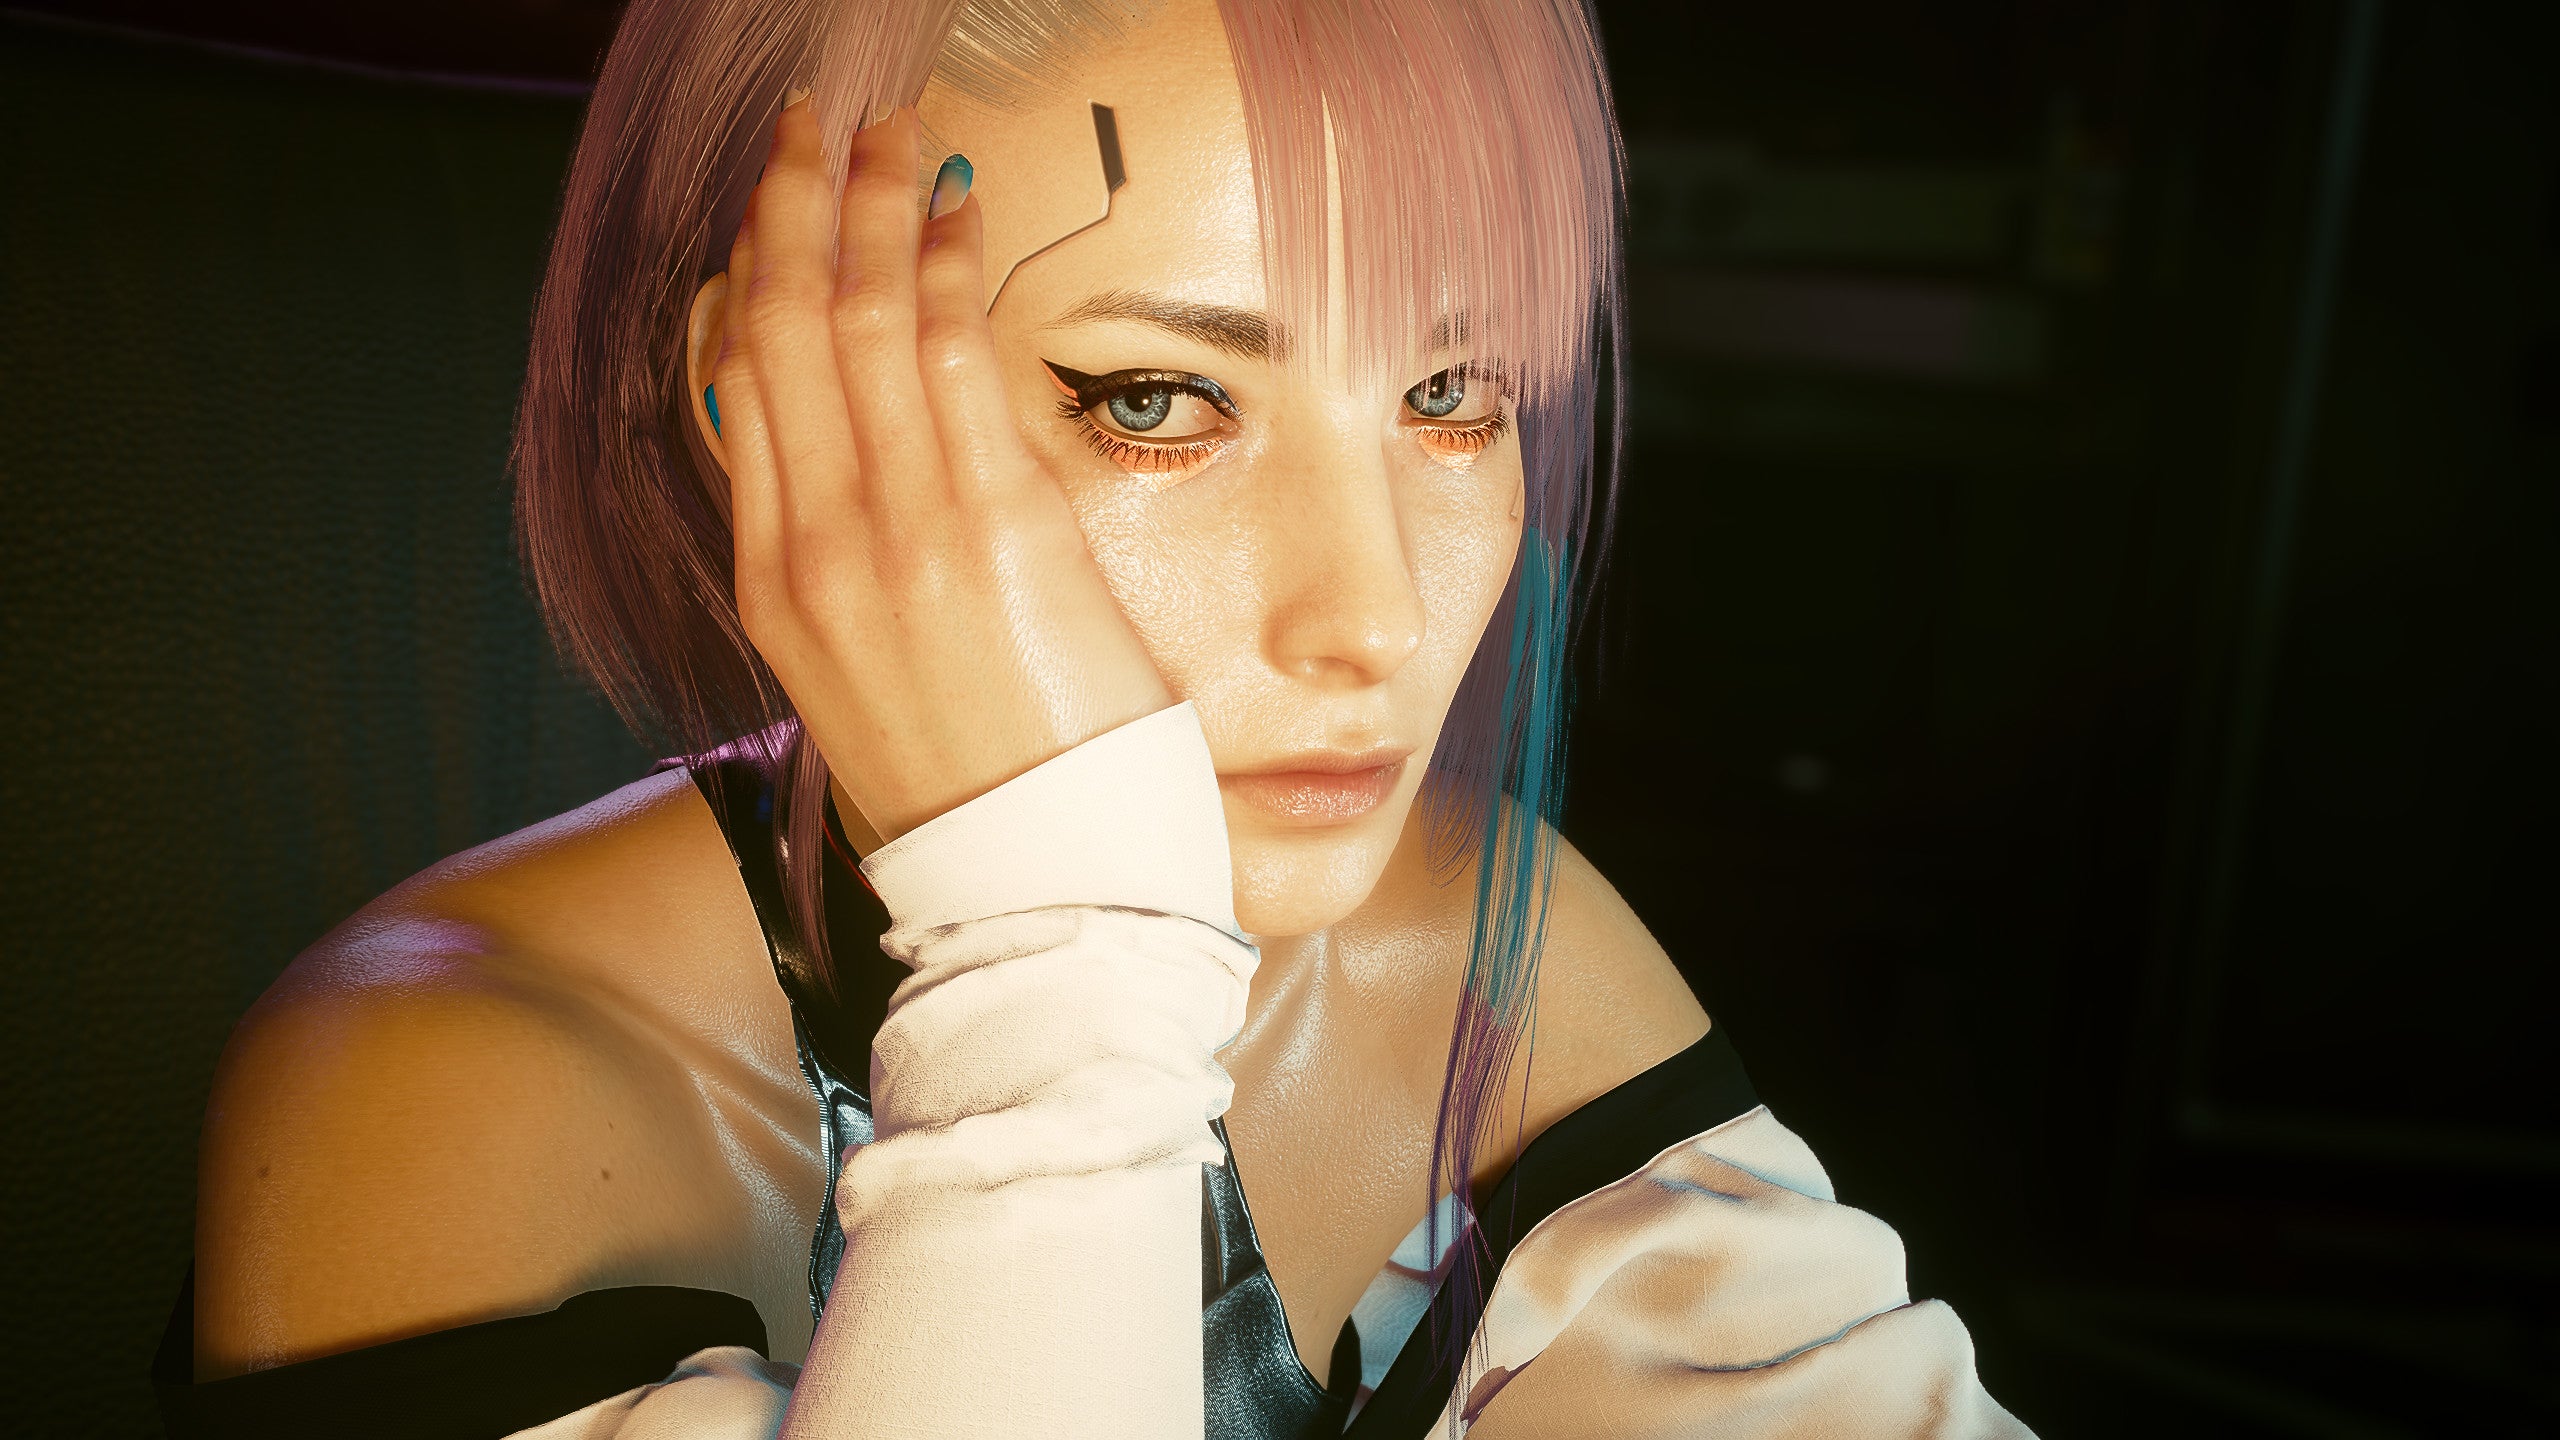 Edgerunner Lucy poses in a screenshot of the Cyberpunk 2077 face preset by UJB.